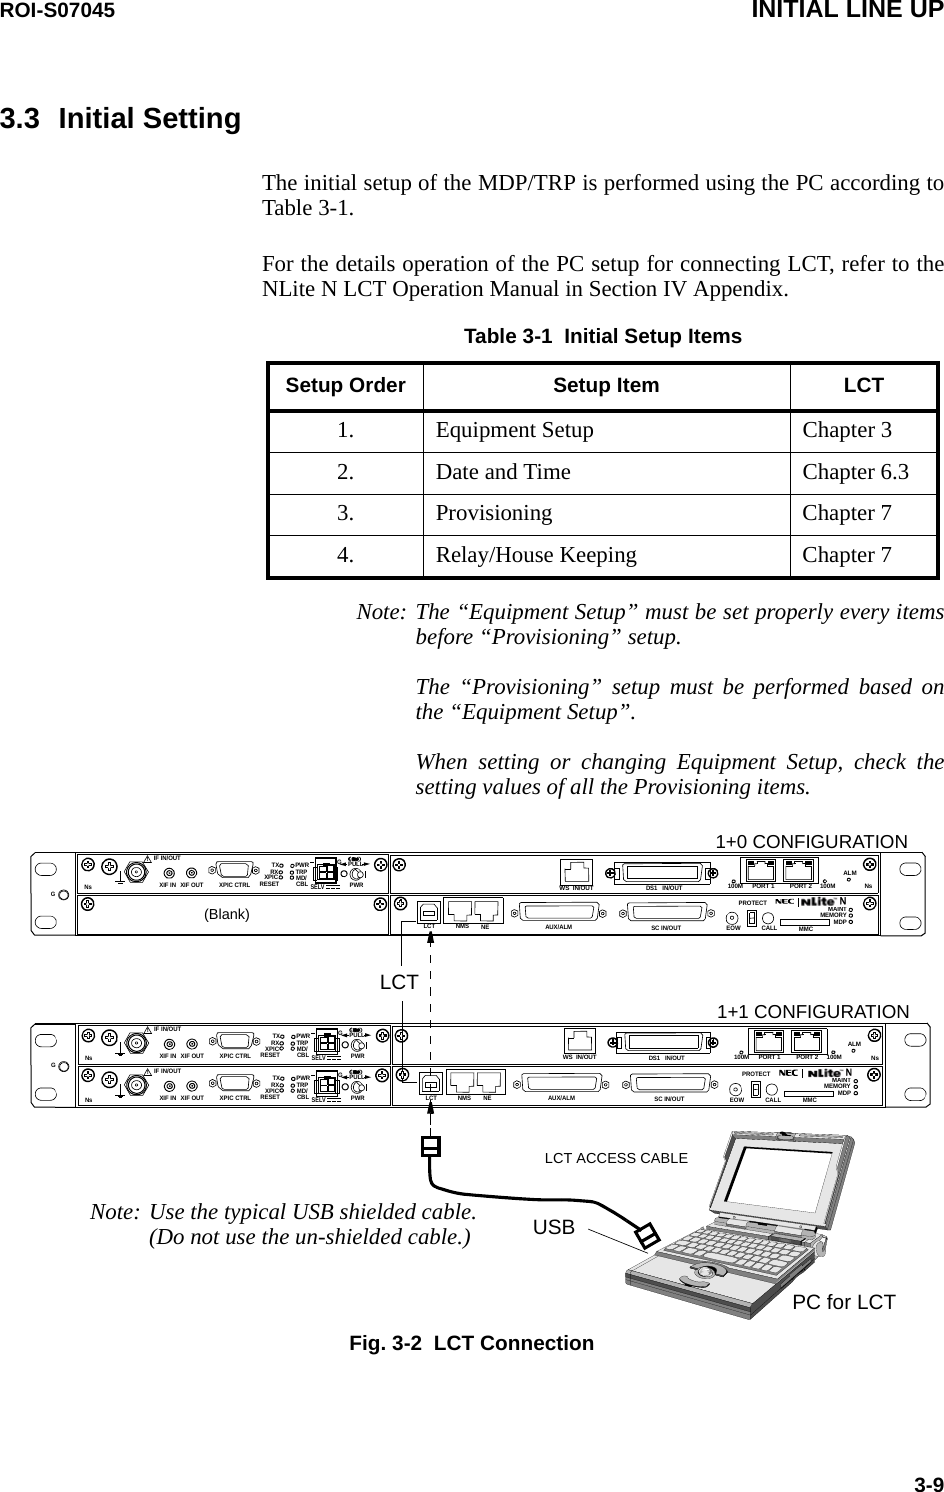 ROI-S07045 INITIAL LINE UP3-93.3 Initial SettingThe initial setup of the MDP/TRP is performed using the PC according toTable 3-1.For the details operation of the PC setup for connecting LCT, refer to theNLite N LCT Operation Manual in Section IV Appendix.Note: The “Equipment Setup” must be set properly every itemsbefore “Provisioning” setup.The “Provisioning” setup must be performed based onthe “Equipment Setup”.When setting or changing Equipment Setup, check thesetting values of all the Provisioning items.Fig. 3-2  LCT ConnectionTable 3-1  Initial Setup ItemsSetup Order Setup Item LCT1. Equipment Setup Chapter 32. Date and Time Chapter 6.33. Provisioning Chapter 74. Relay/House Keeping Chapter 7LCT ACCESS CABLE LCT1+1 CONFIGURATION1+0 CONFIGURATIONPC for LCT USBNote: Use the typical USB shielded cable.(Do not use the un-shielded cable.)SELV!AUX/ALMLCT NMS NE SC IN/OUT EOWPROTECTCALL MMCMAINTMEMORYMDPXIF IN XIF OUTIF IN/OUT TXRXRESETXPIC CTRL XPICPWRTRPMD/CBL PWRPULLGGALM100M PORT 1 PORT 2 100M NsNs DS1   IN/OUTWS  IN/OUTNSELV!AUX/ALMLCT NMS NE SC IN/OUT EOWPROTECTCALL MMCMAINTMEMORYMDPXIF IN XIF OUTIF IN/OUT TXRXRESETXPIC CTRL XPICPWRTRPMD/CBL PWRPULLGSELV!XIF IN XIF OUTIF IN/OUT TXRXRESETXPIC CTRL XPICPWRTRPMD/CBL PWRPULLGGALM100M PORT 1 PORT 2 100MNsNsWS  IN/OUT NsNDS1   IN/OUT(Blank)